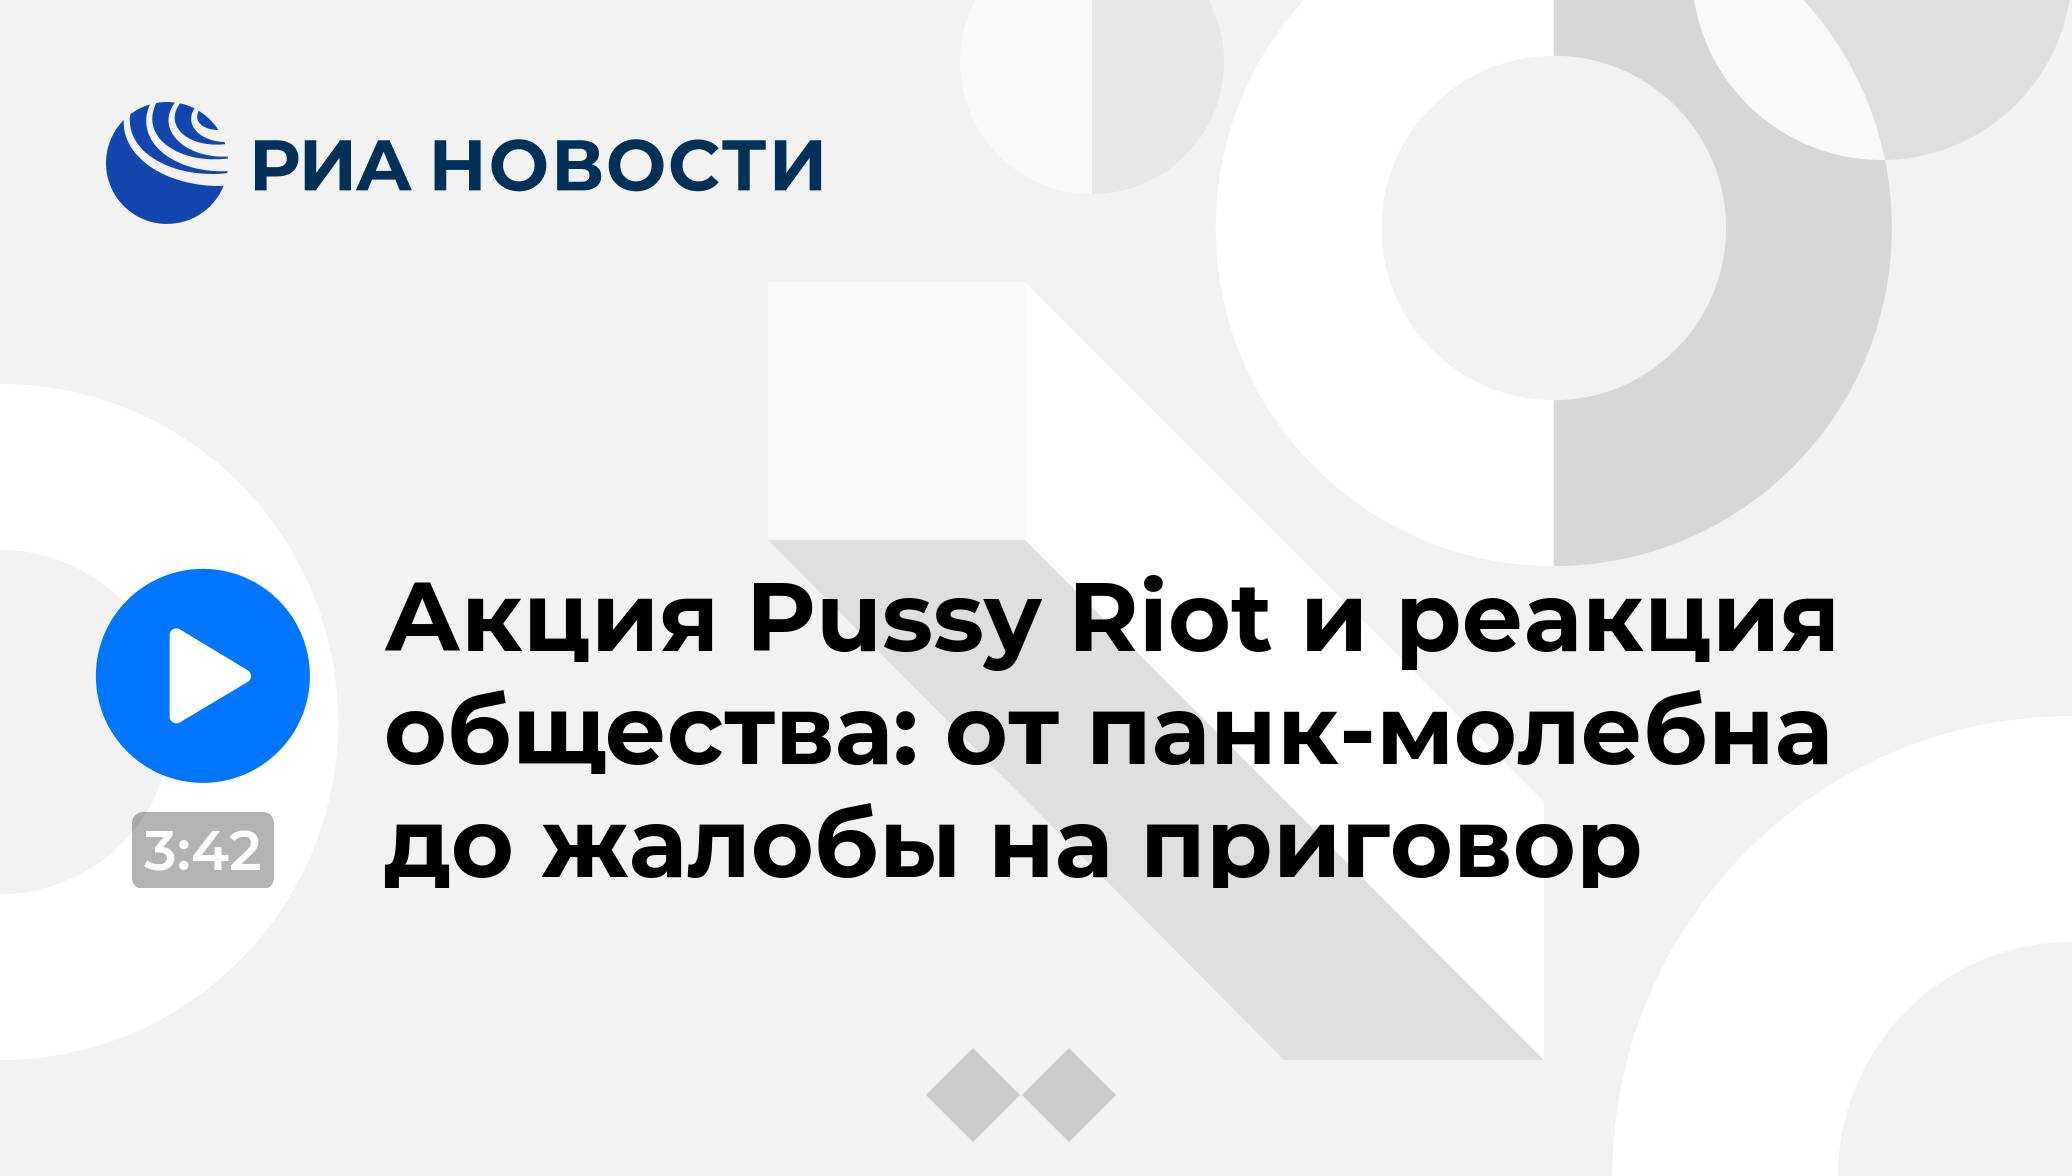 Pussy riot